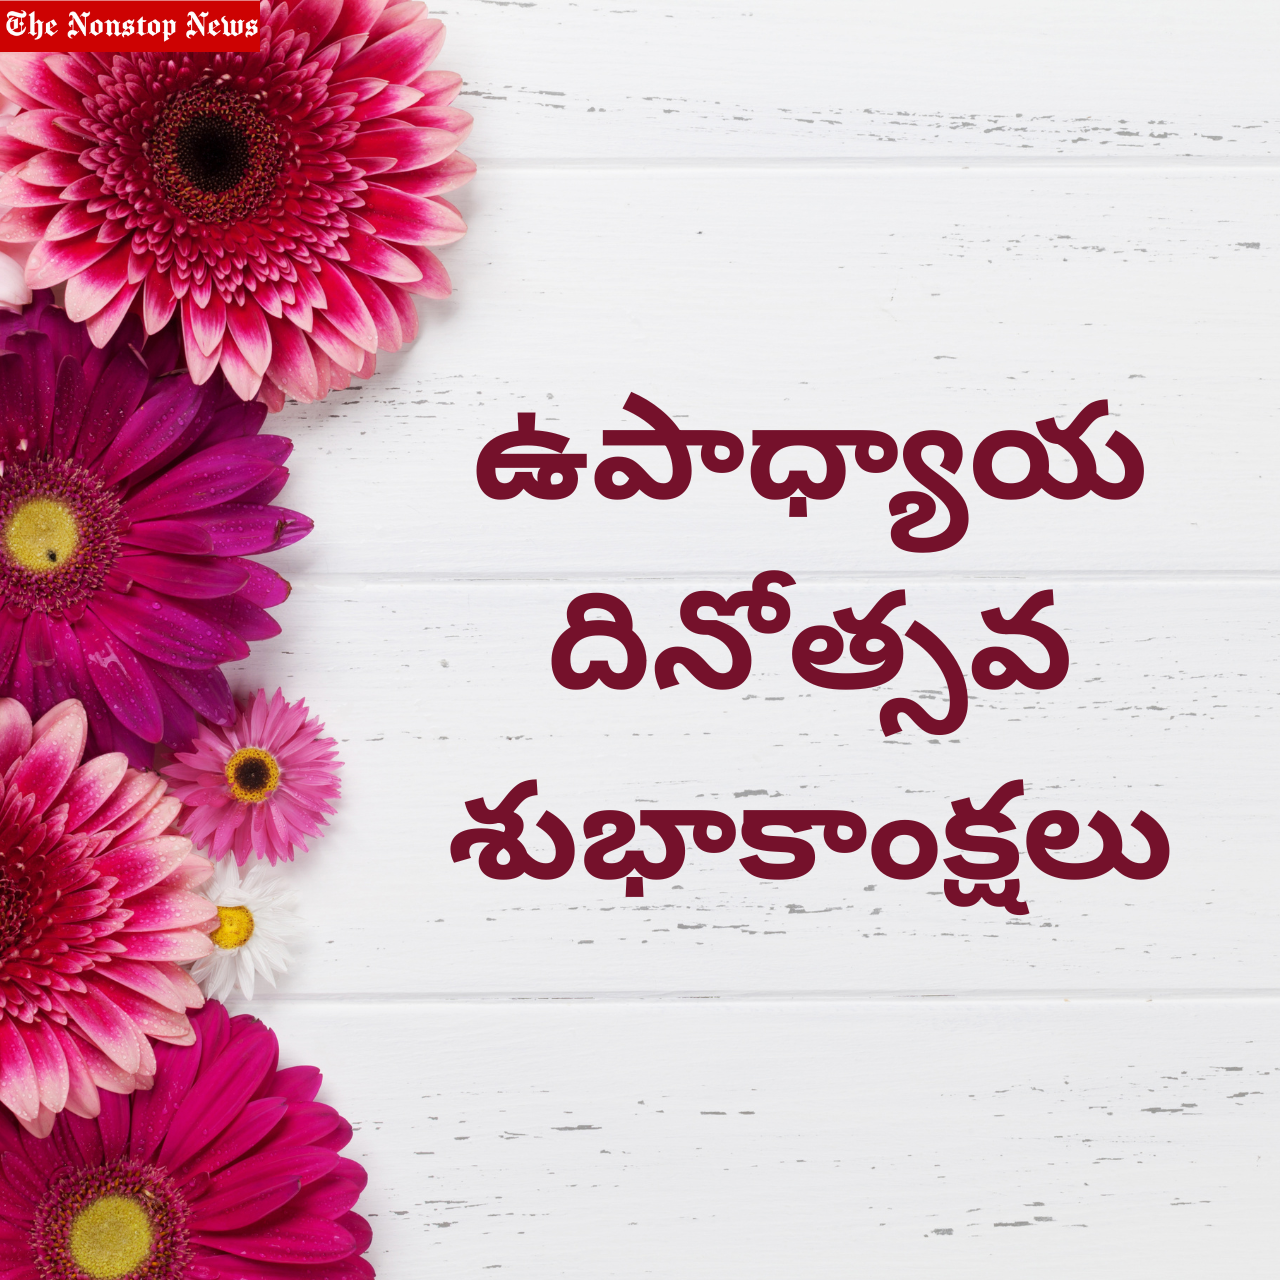 Teachers' Day Telugu and Kannada Greetings 2022: Quotes, Wishes, Images, Pictures, Messages, and Posters For Friends and Family